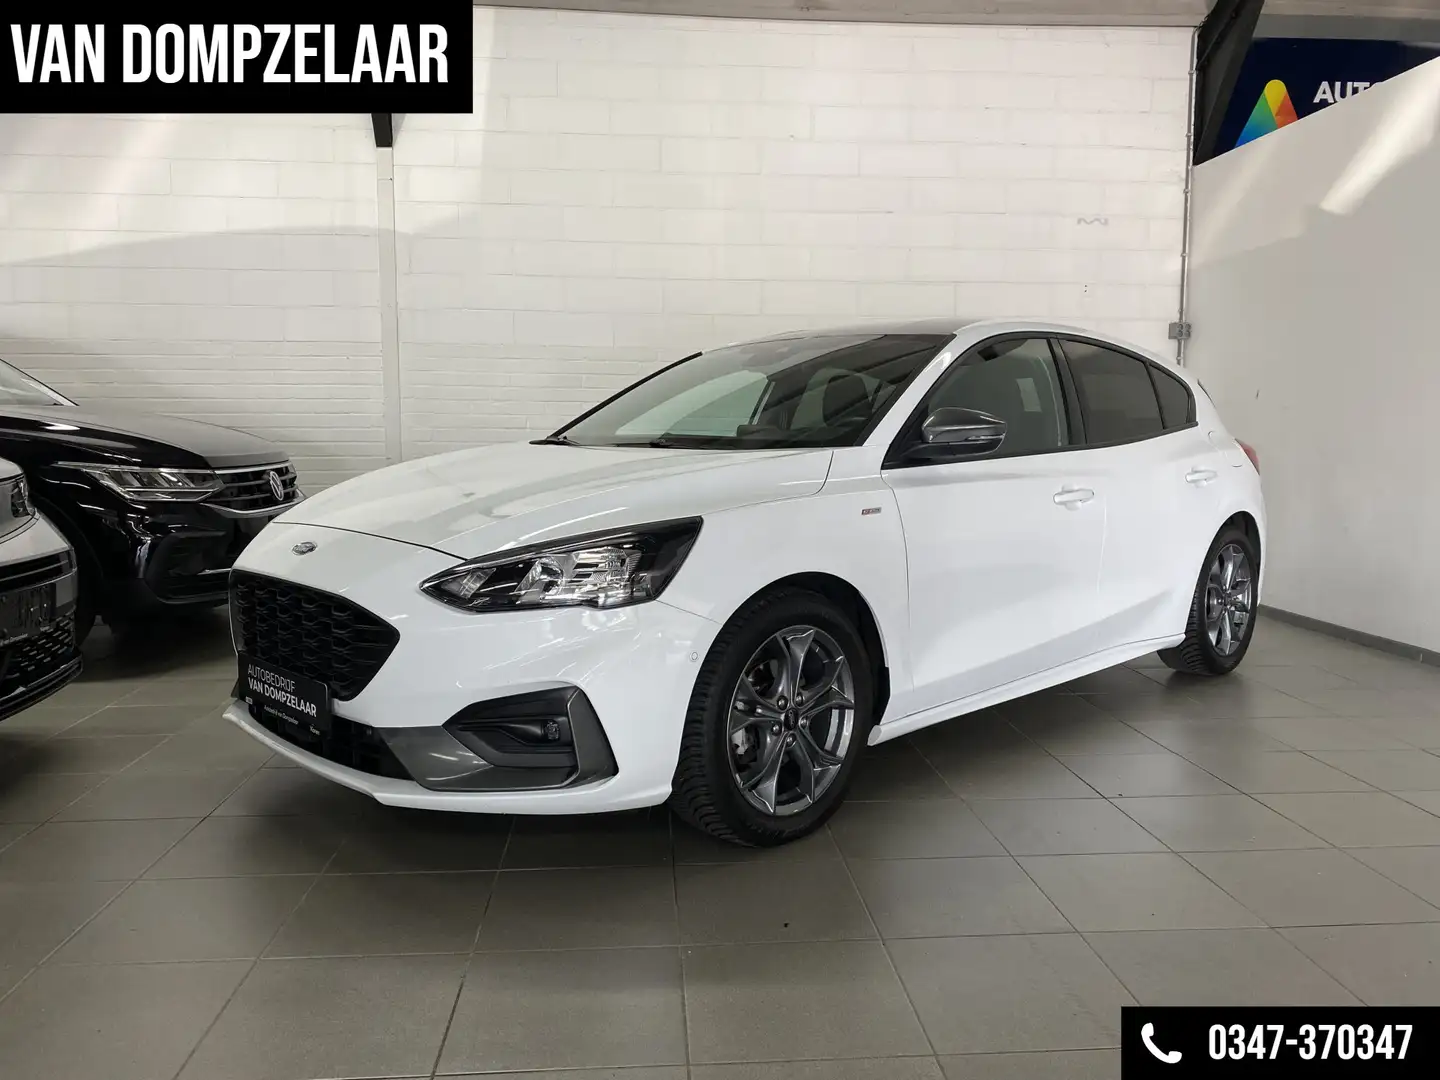 Ford Focus 1.5 ST - LINE 150 PK / AUTOMAAT / NAVI / CAMERA / White - 2